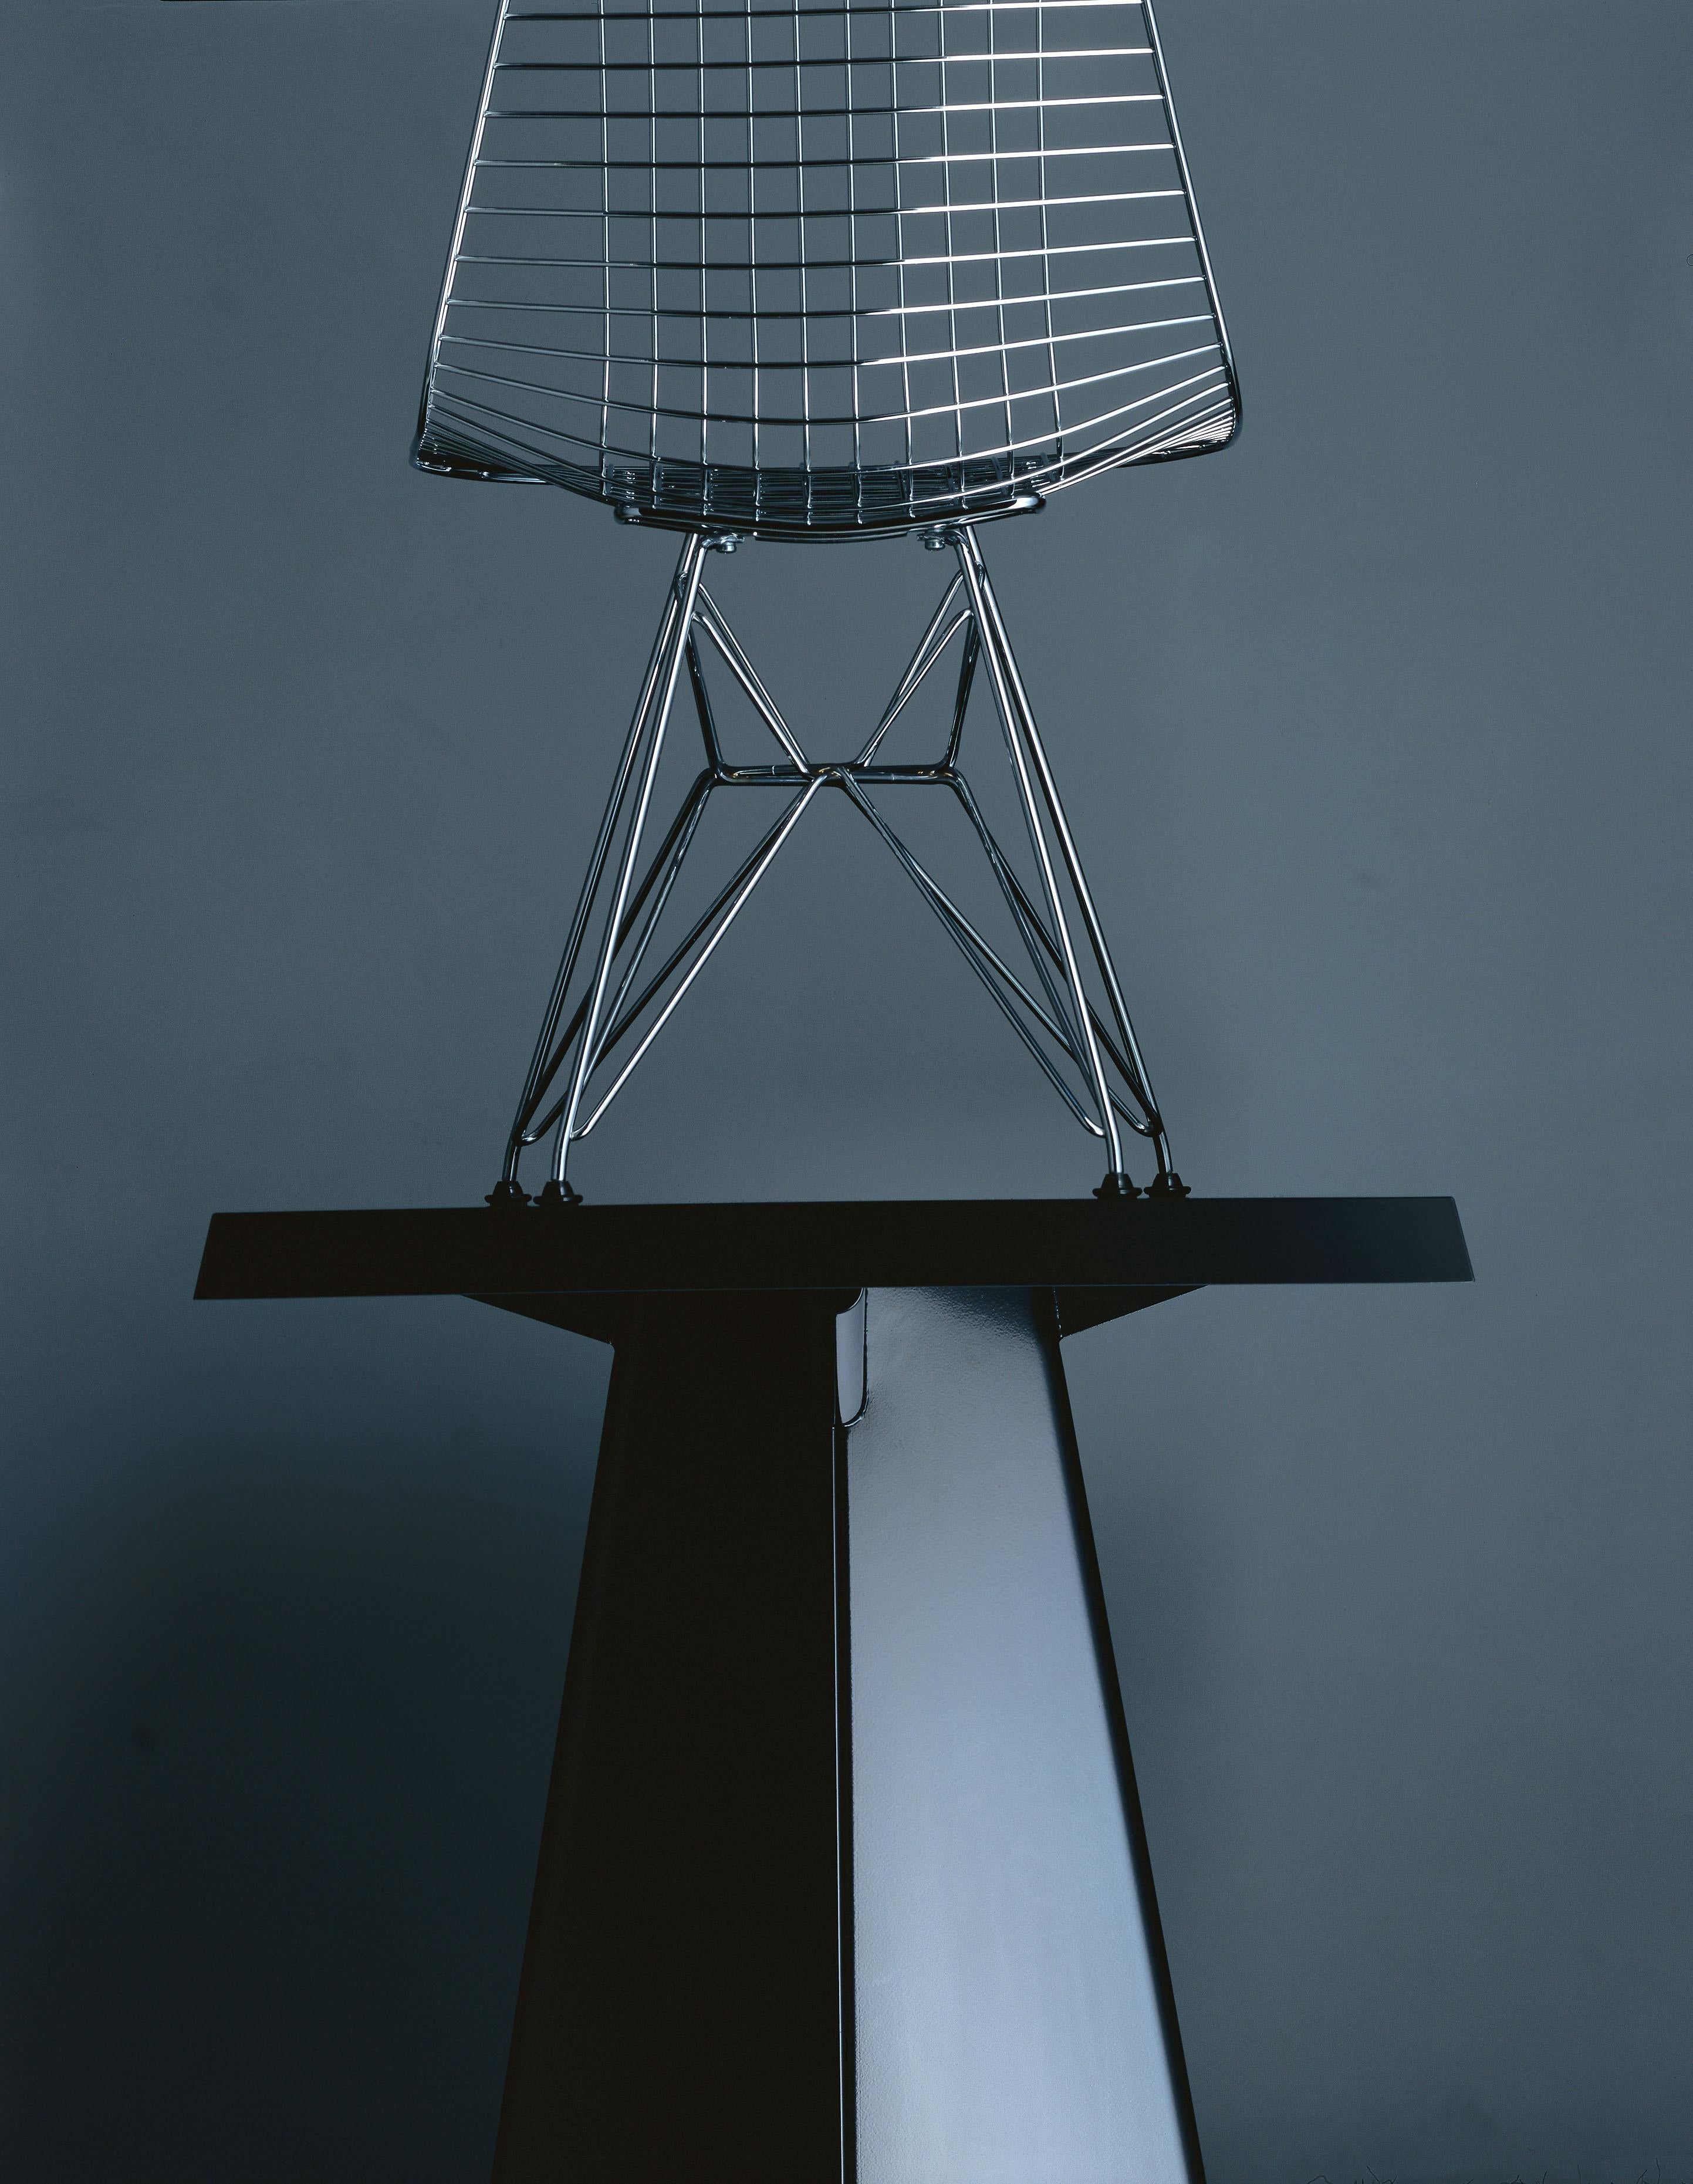 Powder-Coated Vitra Trapèze Table in Black by Jean Prouvé